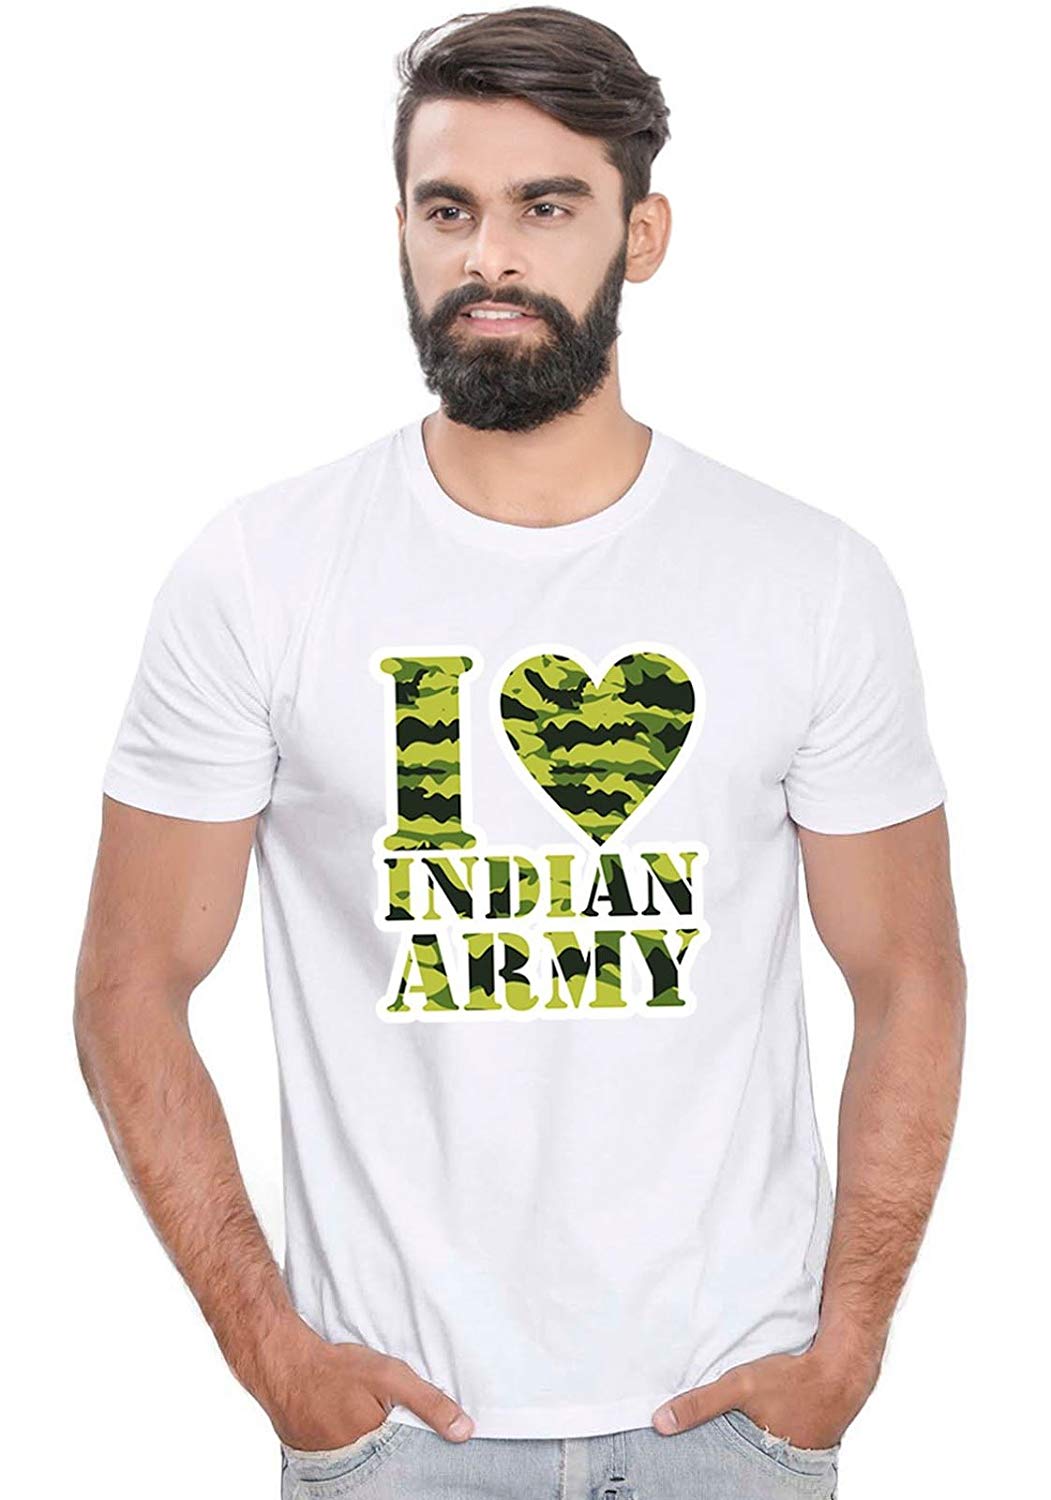 DOUBLE F ROUND NECK HALF SLEEVE WHITE COLOR I LOVE INDIAN ARMY PRINTED T-SHIRT FOR MEN